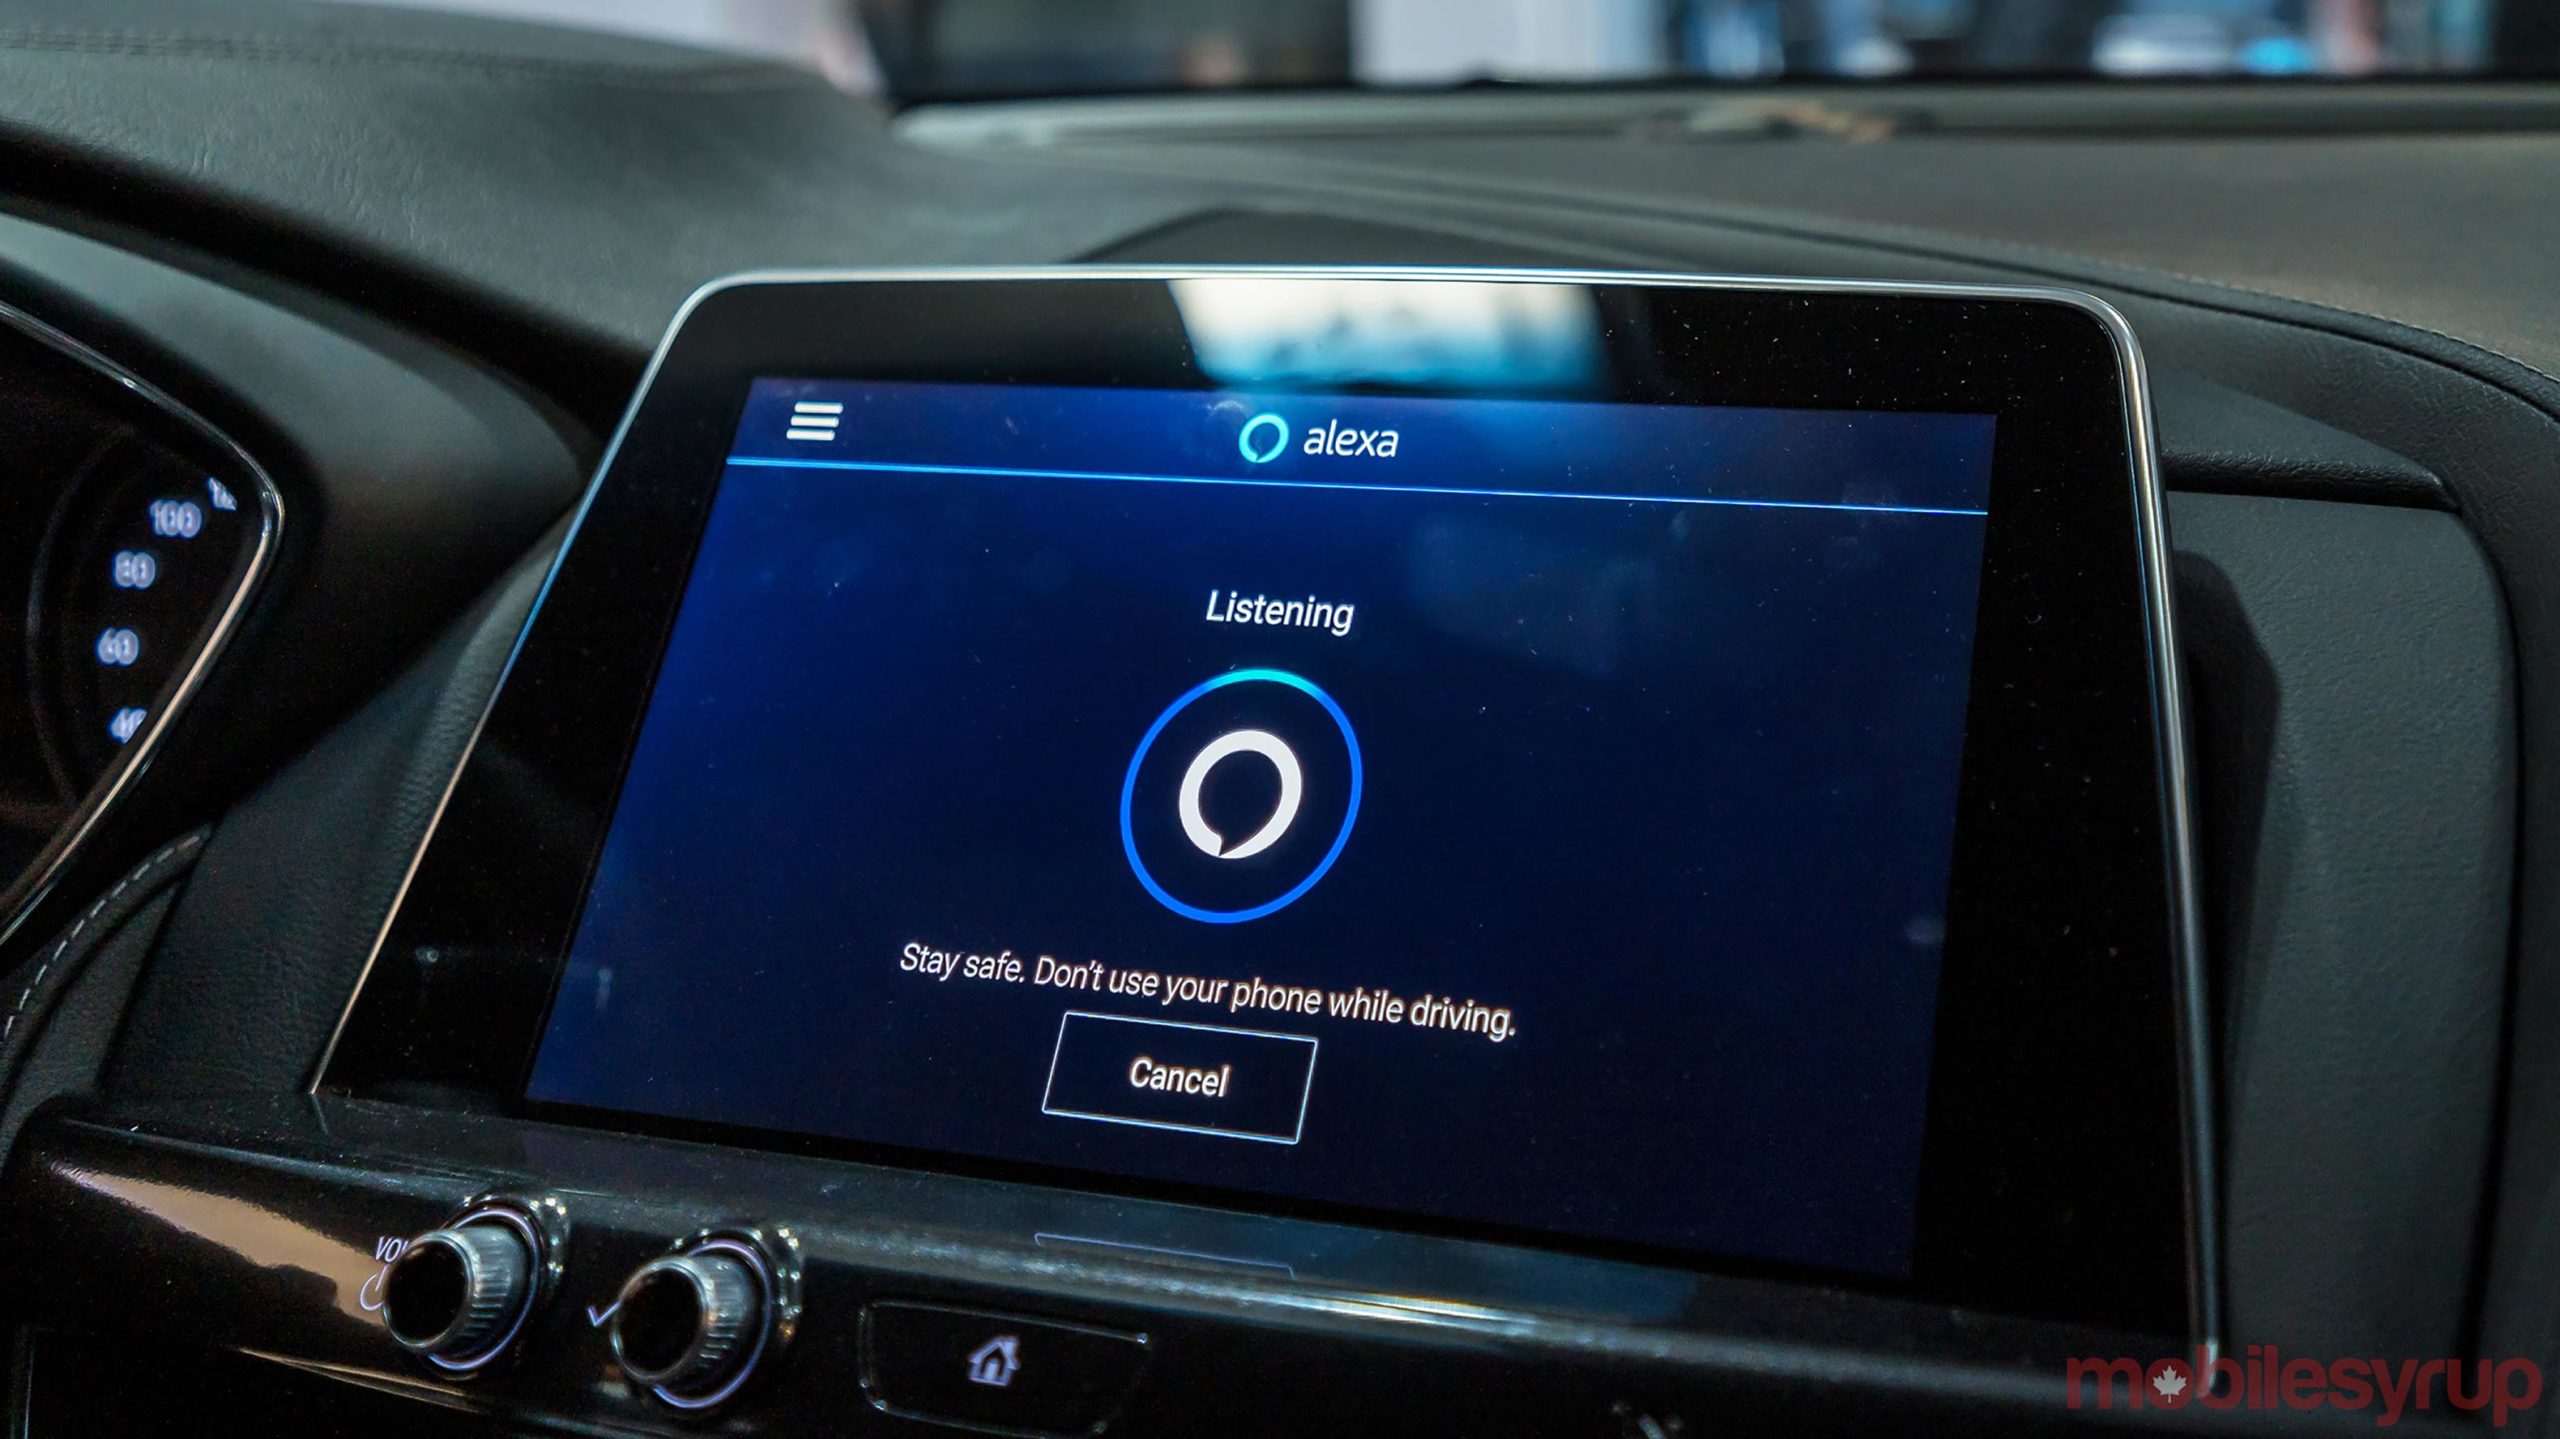 How to use Alexa in your car